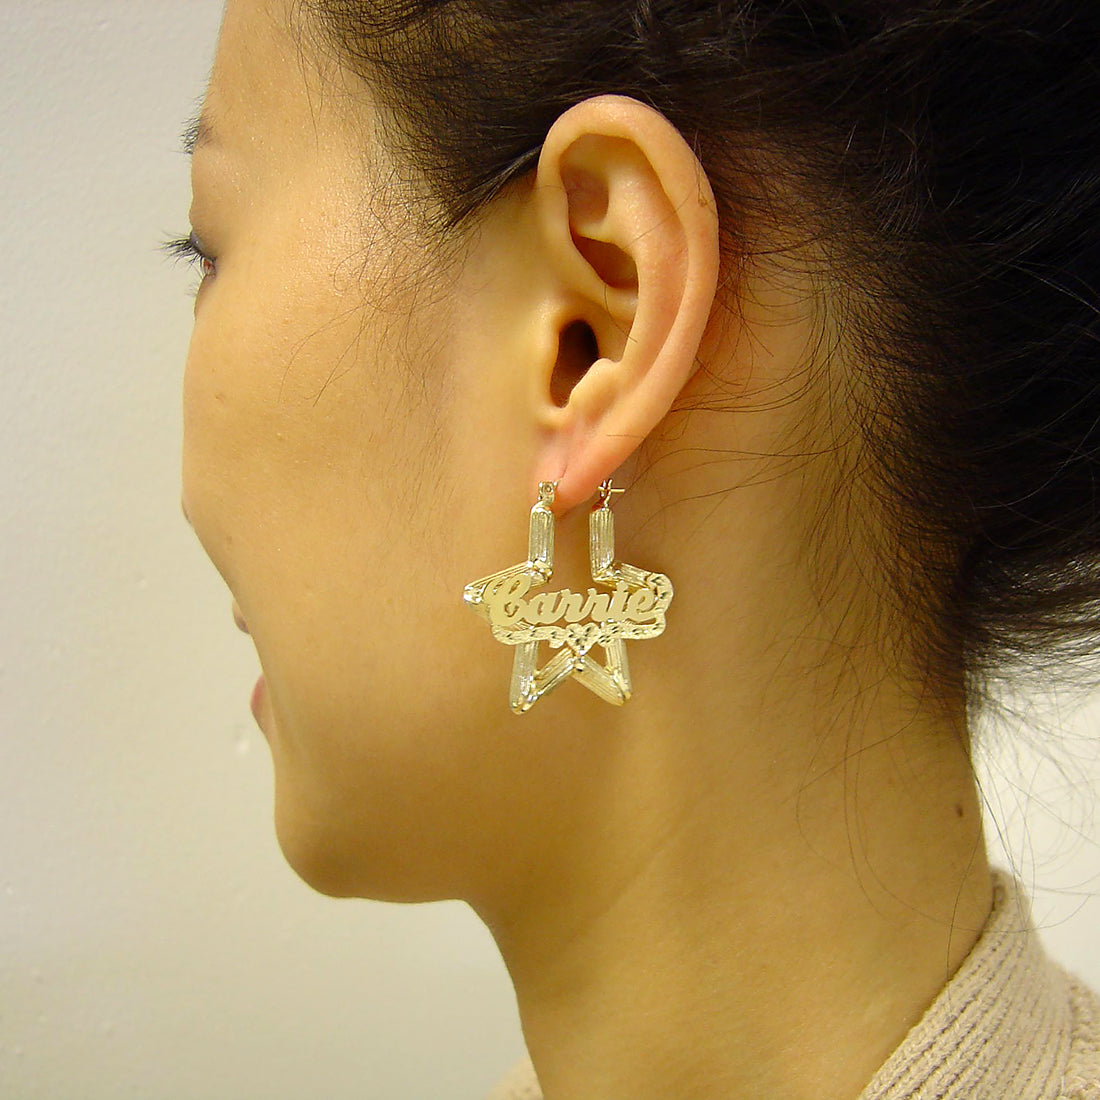 10K Gold Star Bamboo Personalized Name Earrings 1.3 Inch Diamond Cut Heart Underneath Design